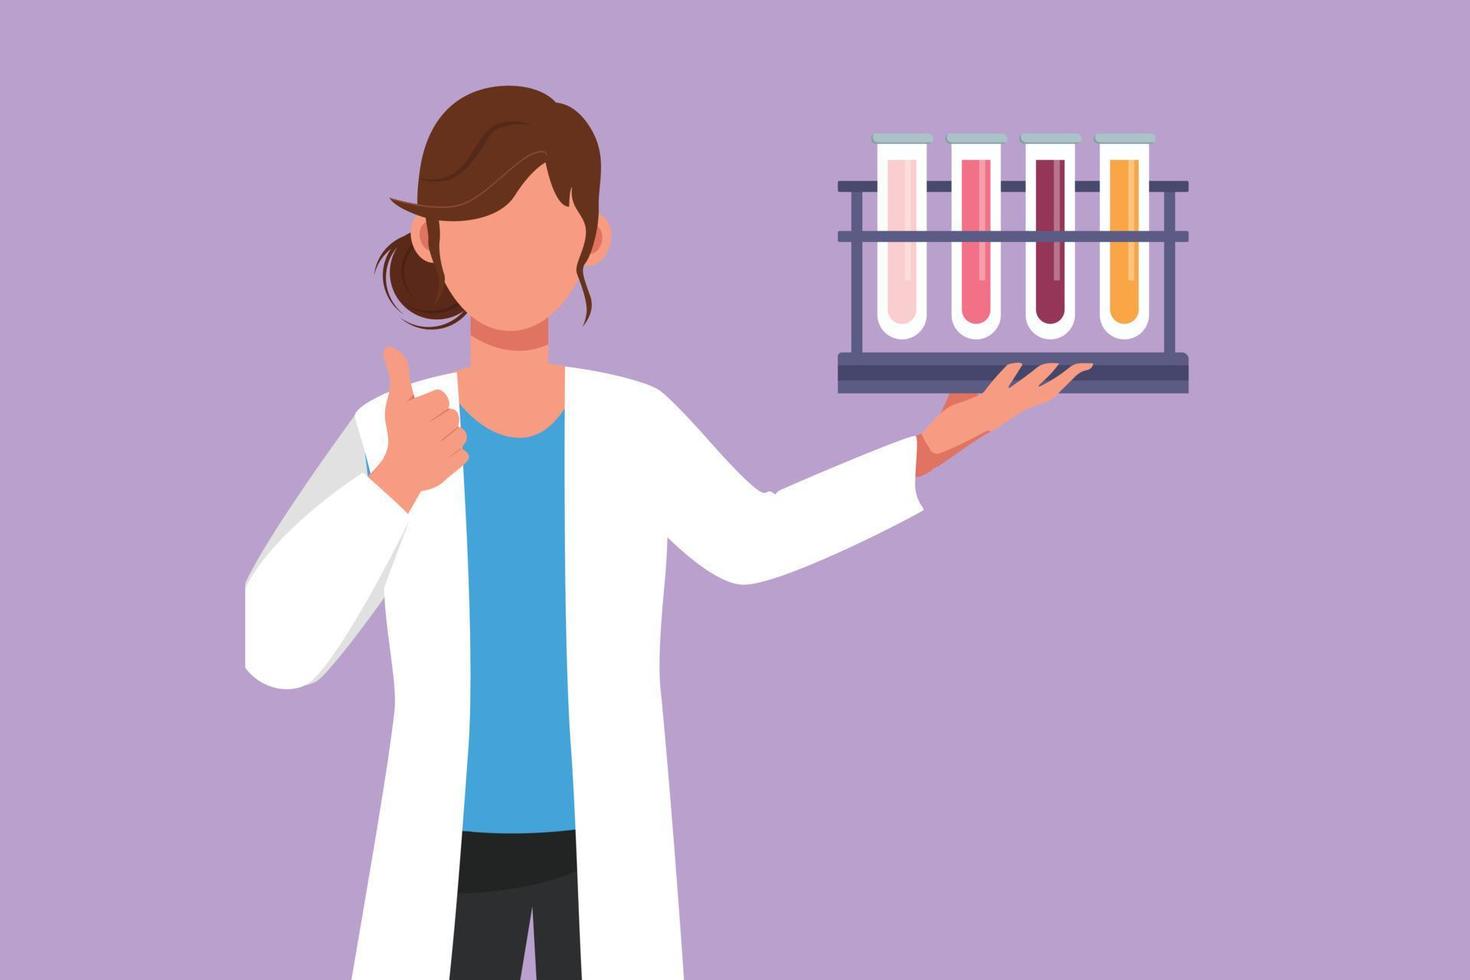 Graphic flat design drawing female scientist holding measuring tube with thumbs up gesture and examining chemical solution to make vaccine due to pandemic outbreak. Cartoon style vector illustration